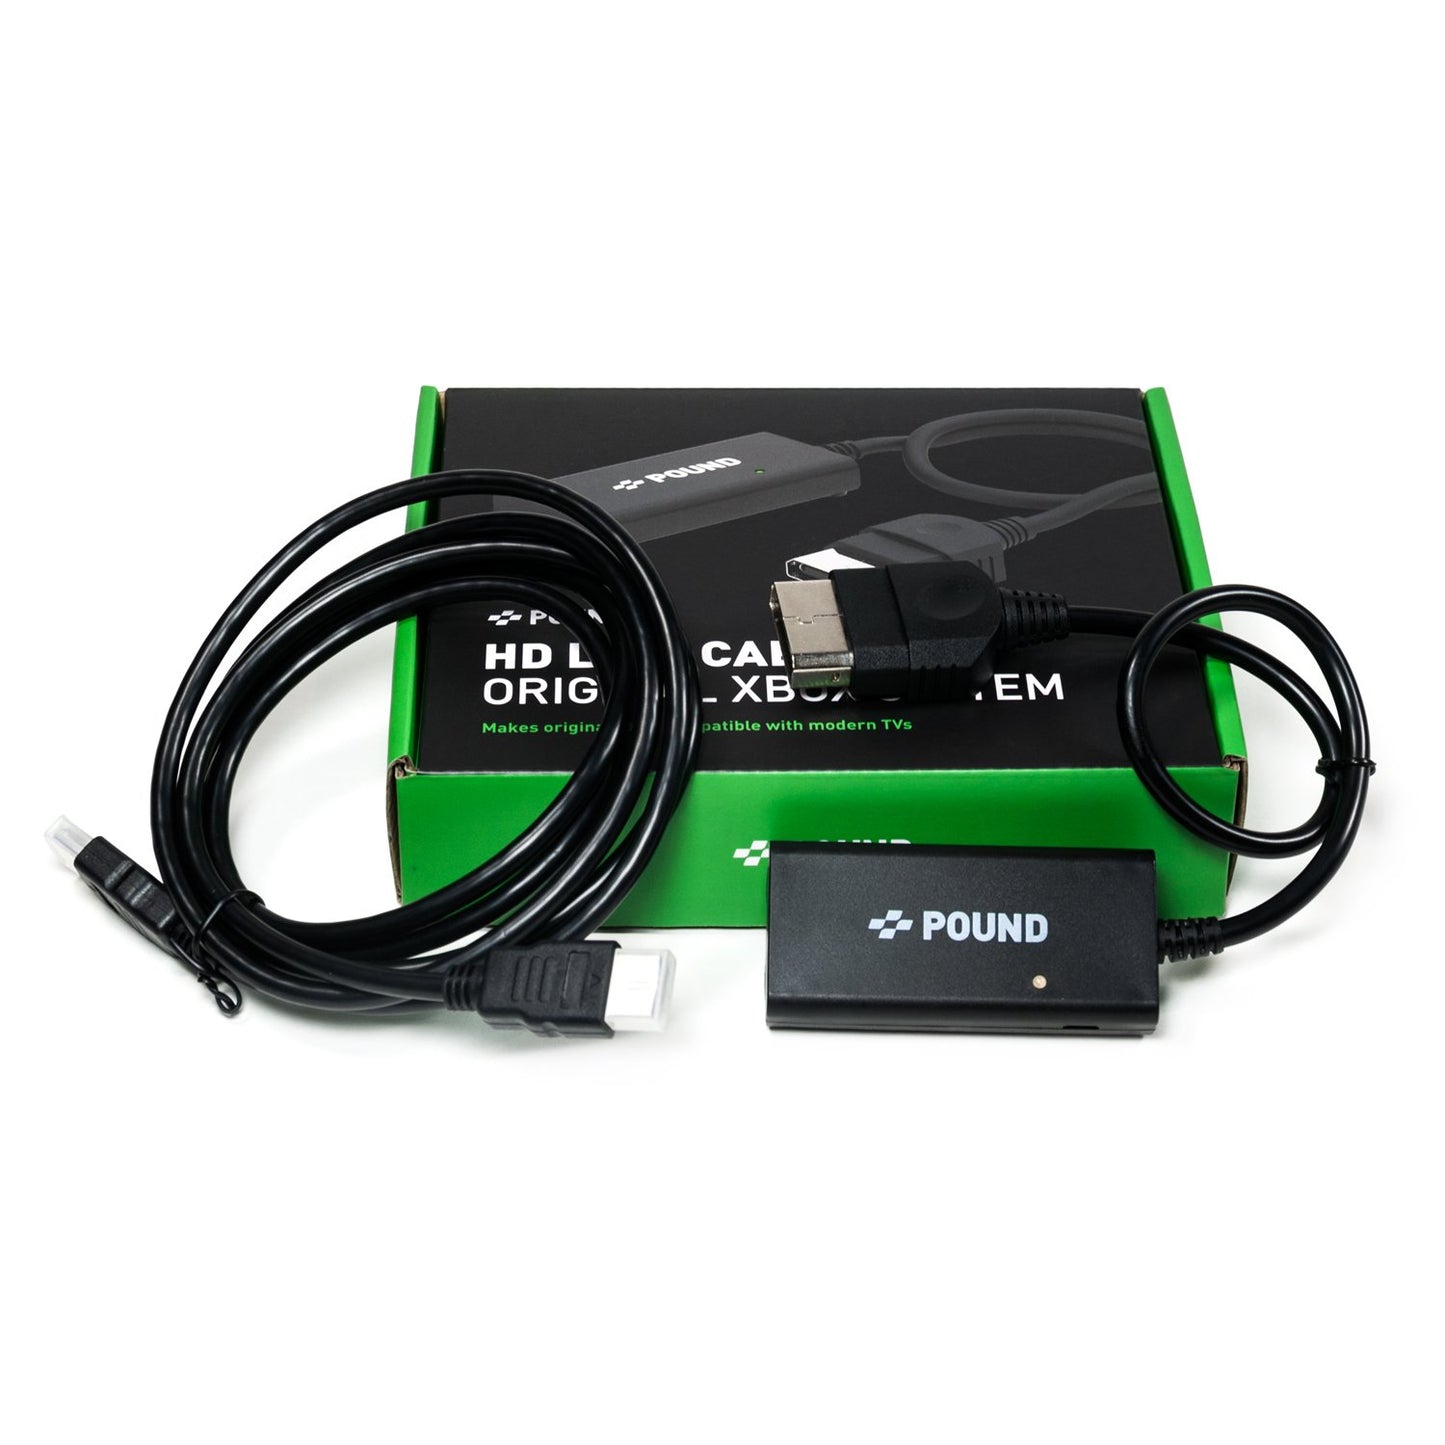 Pound HD Link Cable (Xbox)